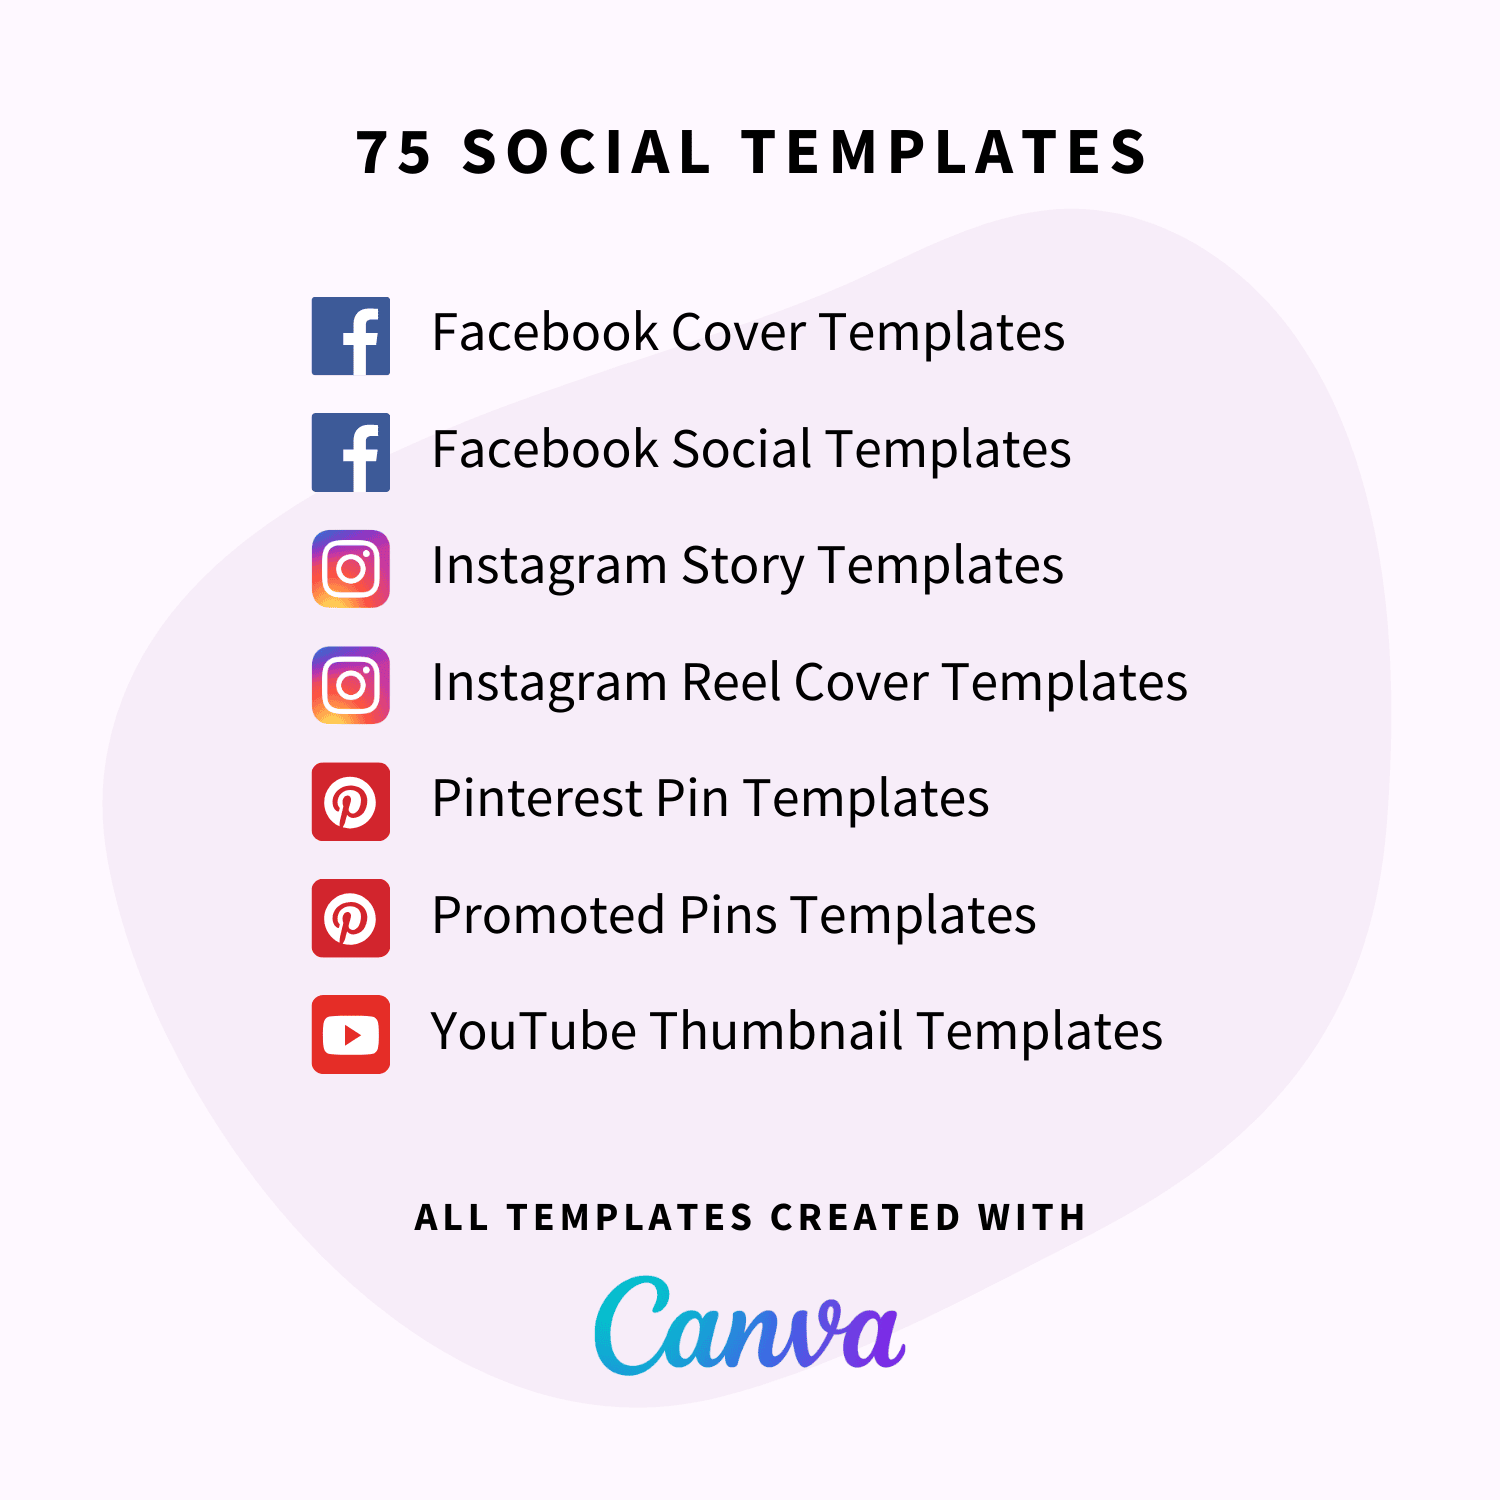 Templates included in the Social Media Super Bundle Toolbox - Facebook, Instagram, Pinterest, YouTube